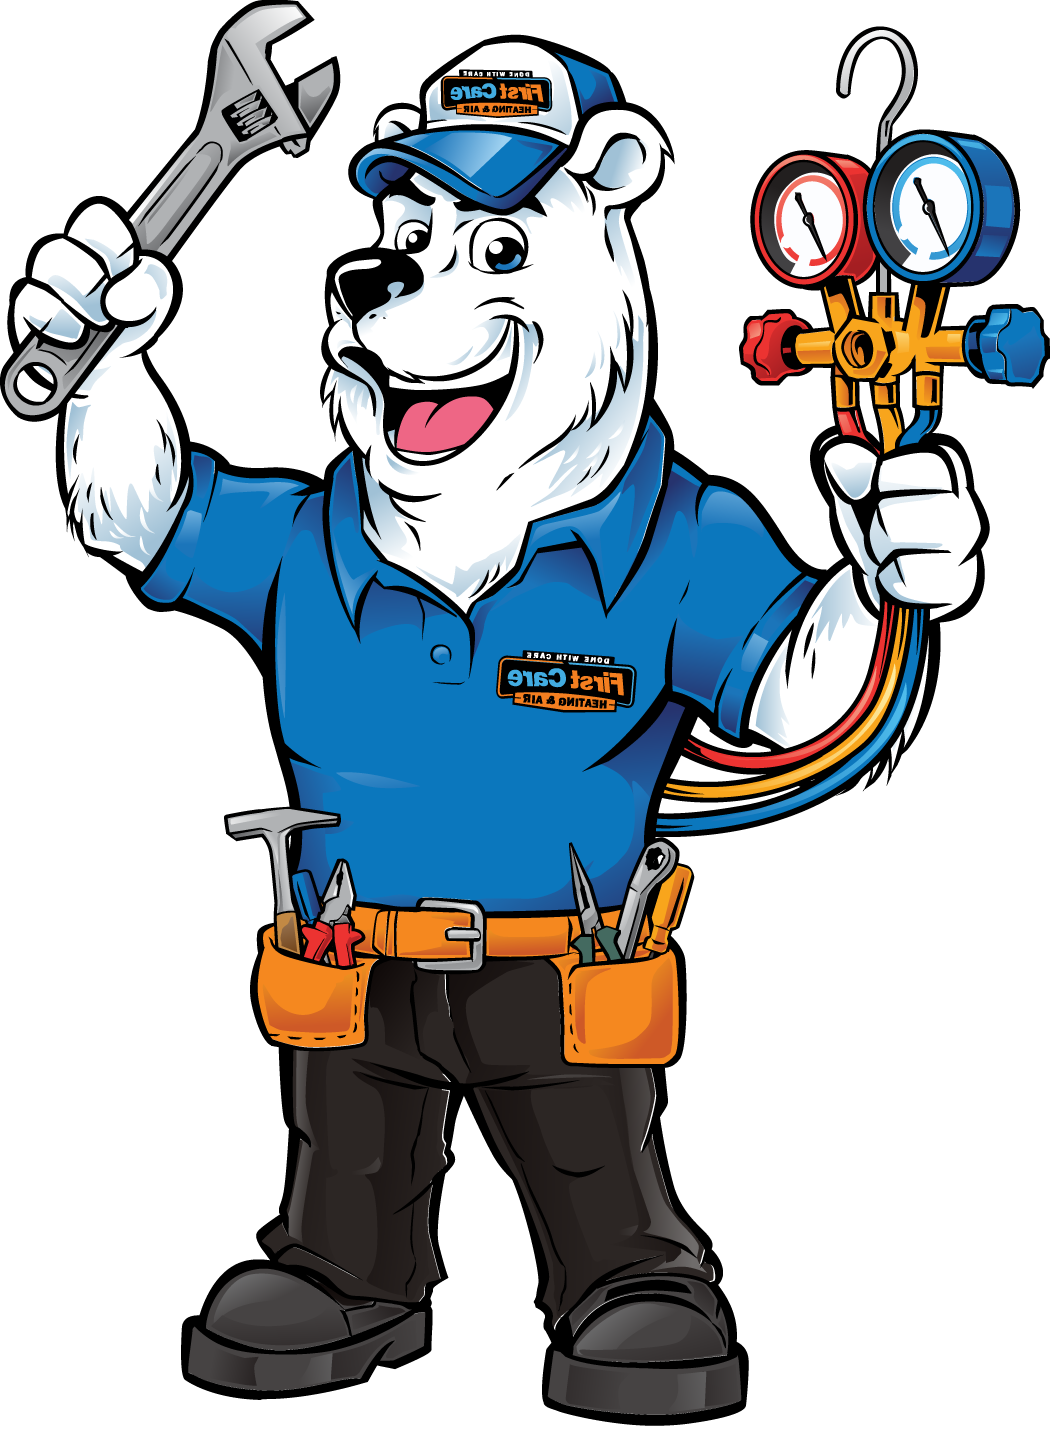 Call for reliable Air Conditioner replacement in Naperville IL.